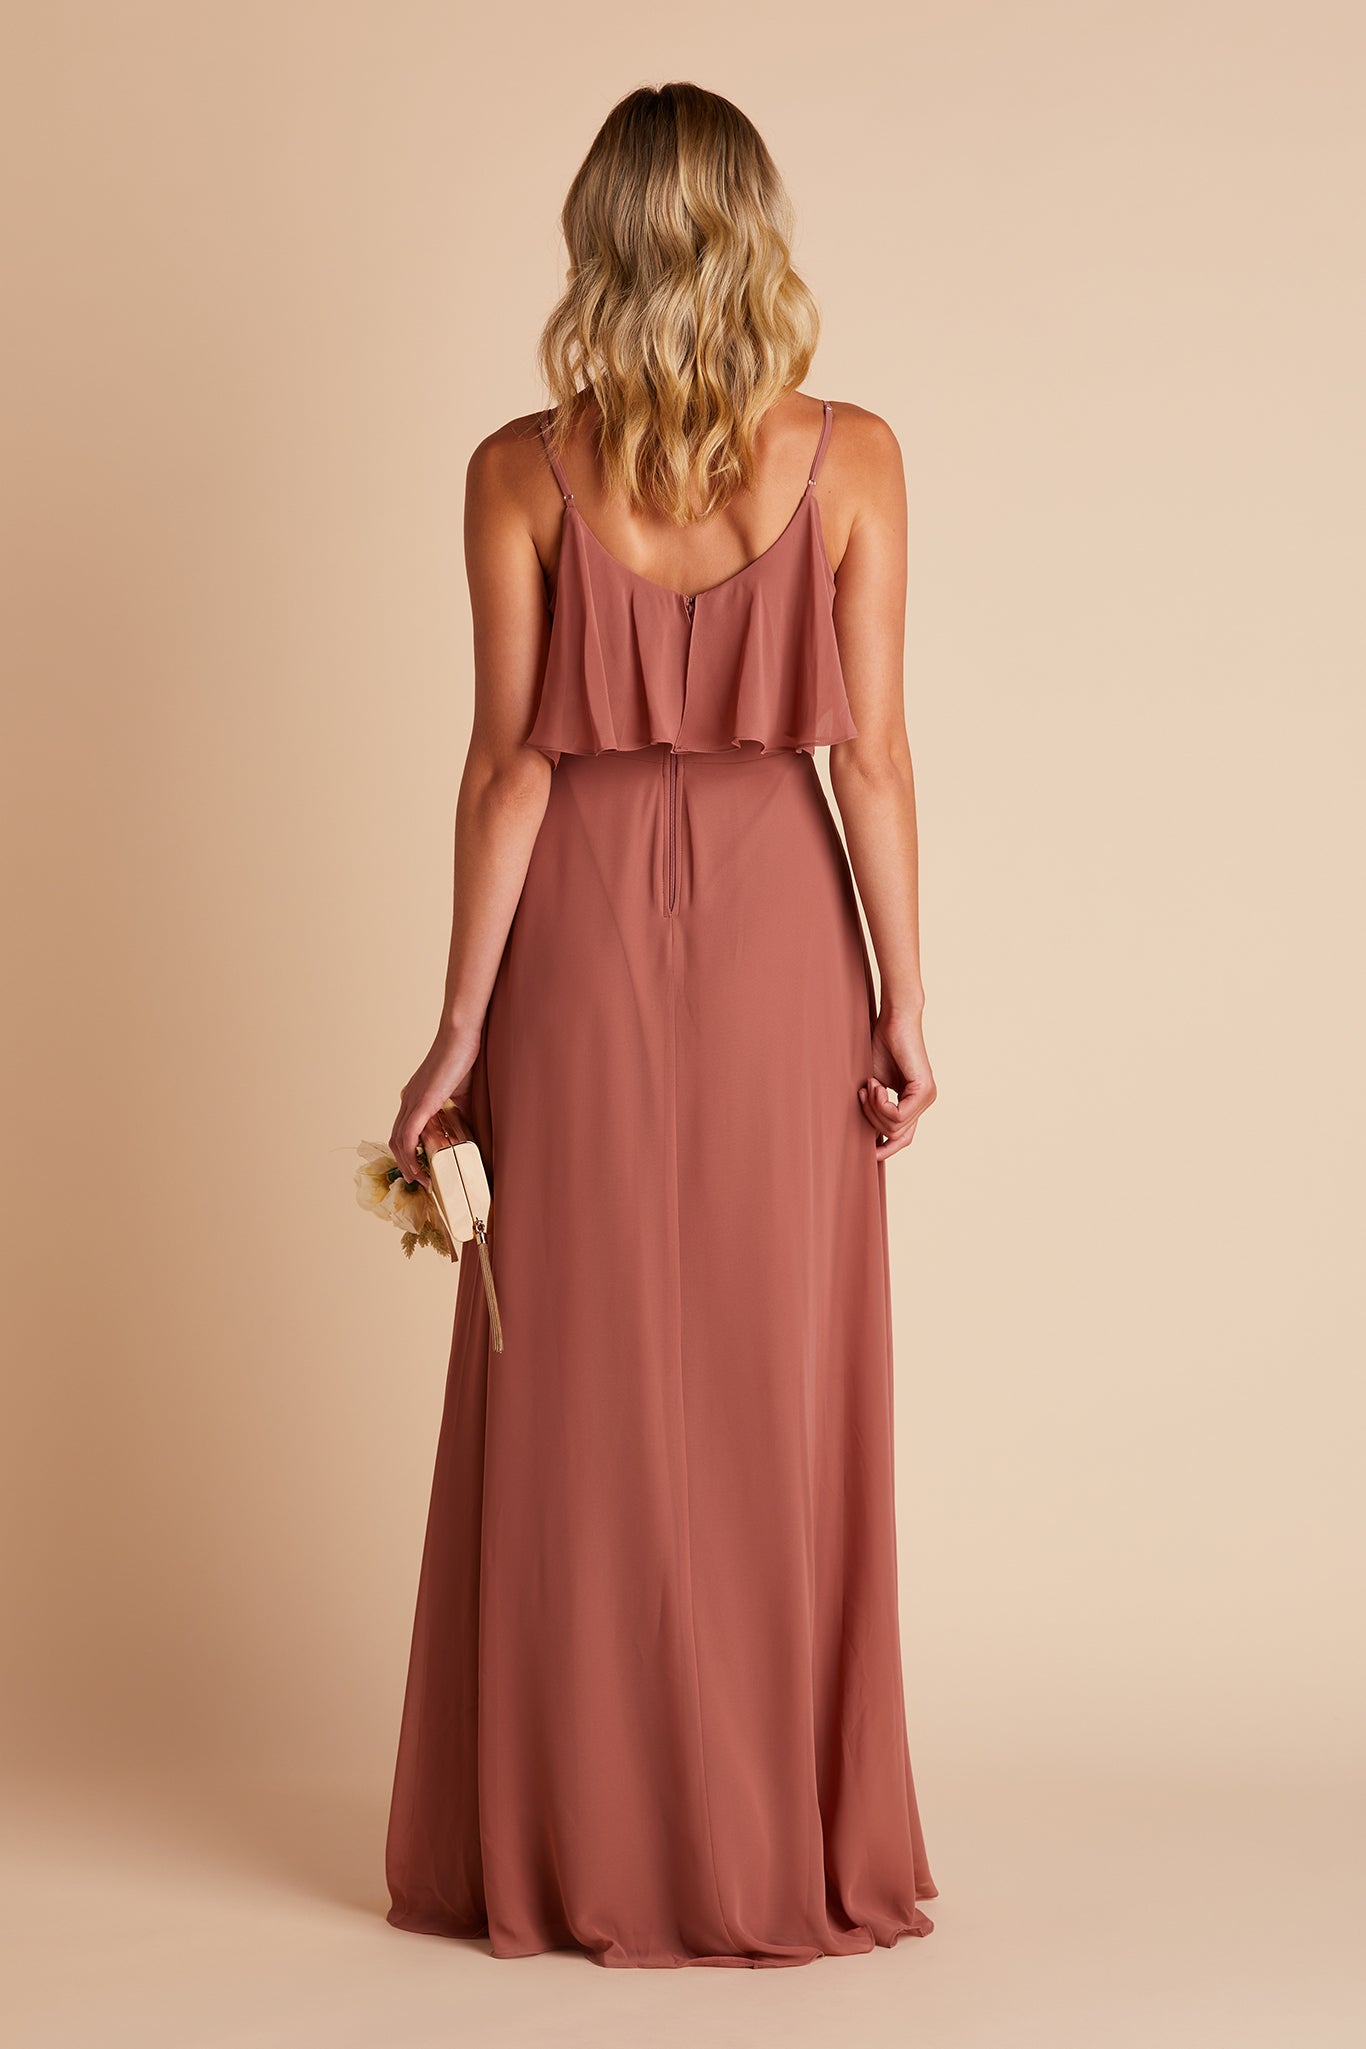 Jane convertible bridesmaid dress with slit in desert rose chiffon by Birdy Grey, back view